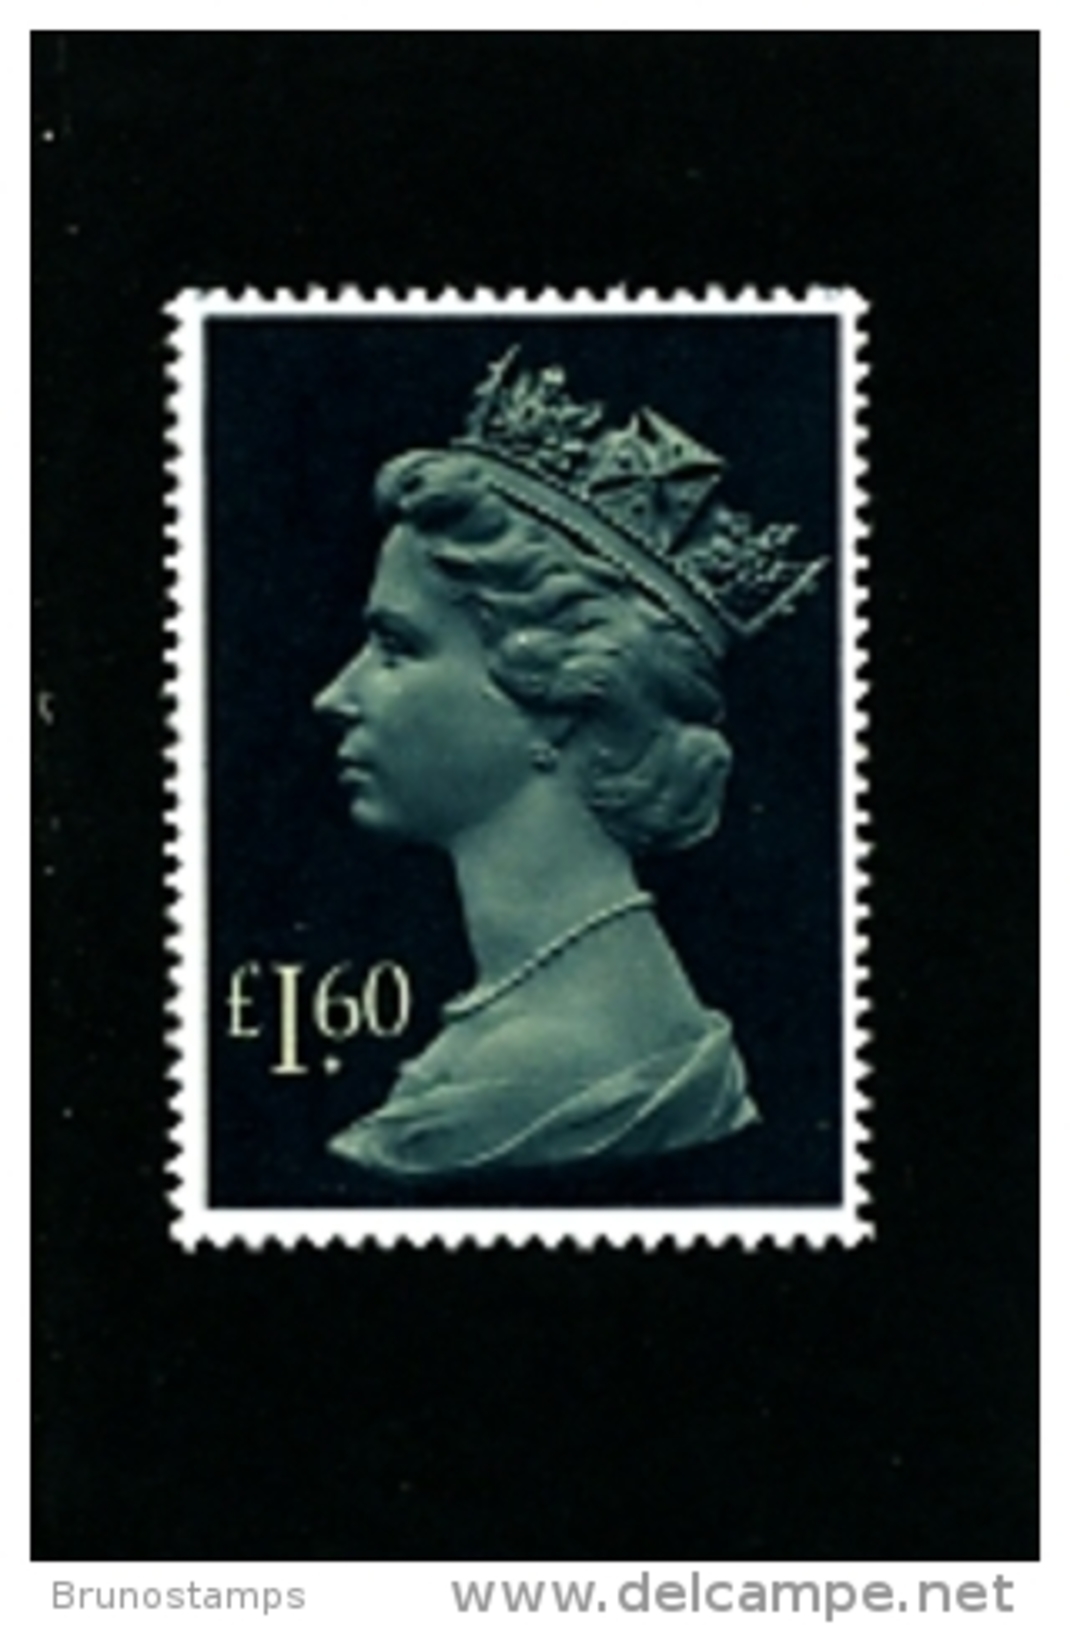 GREAT BRITAIN - 1987  £ 1.60  PARCEL  HIGH VALUE  MINT NH - Nuevos